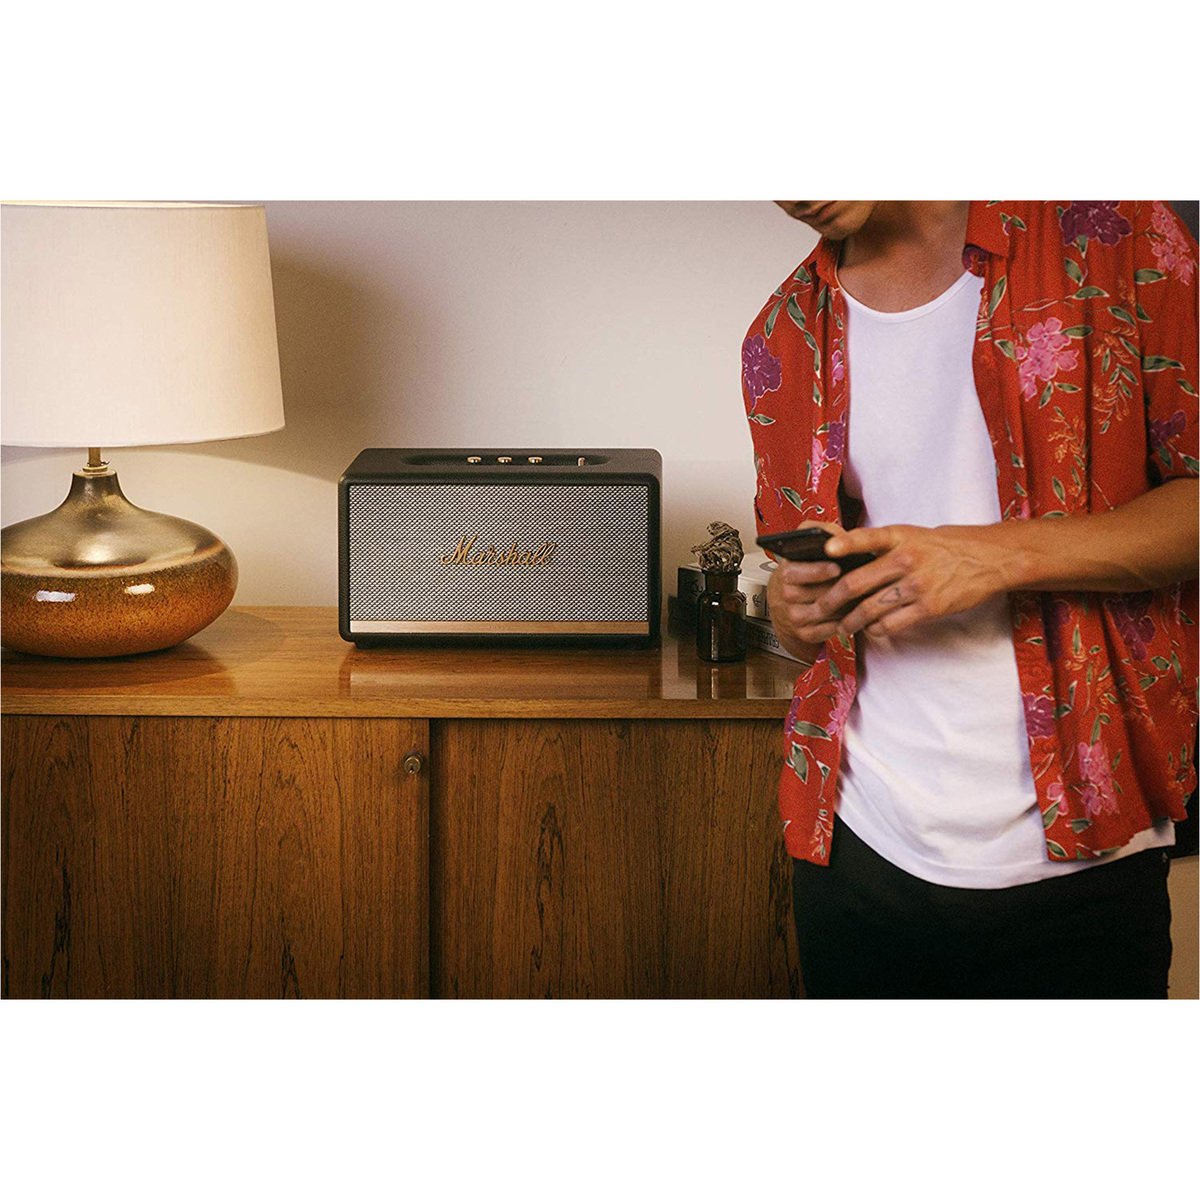 Buy Marshall Stanmore II Bluetooth Speaker Brown Online - Shop Electronics  & Appliances on Carrefour UAE